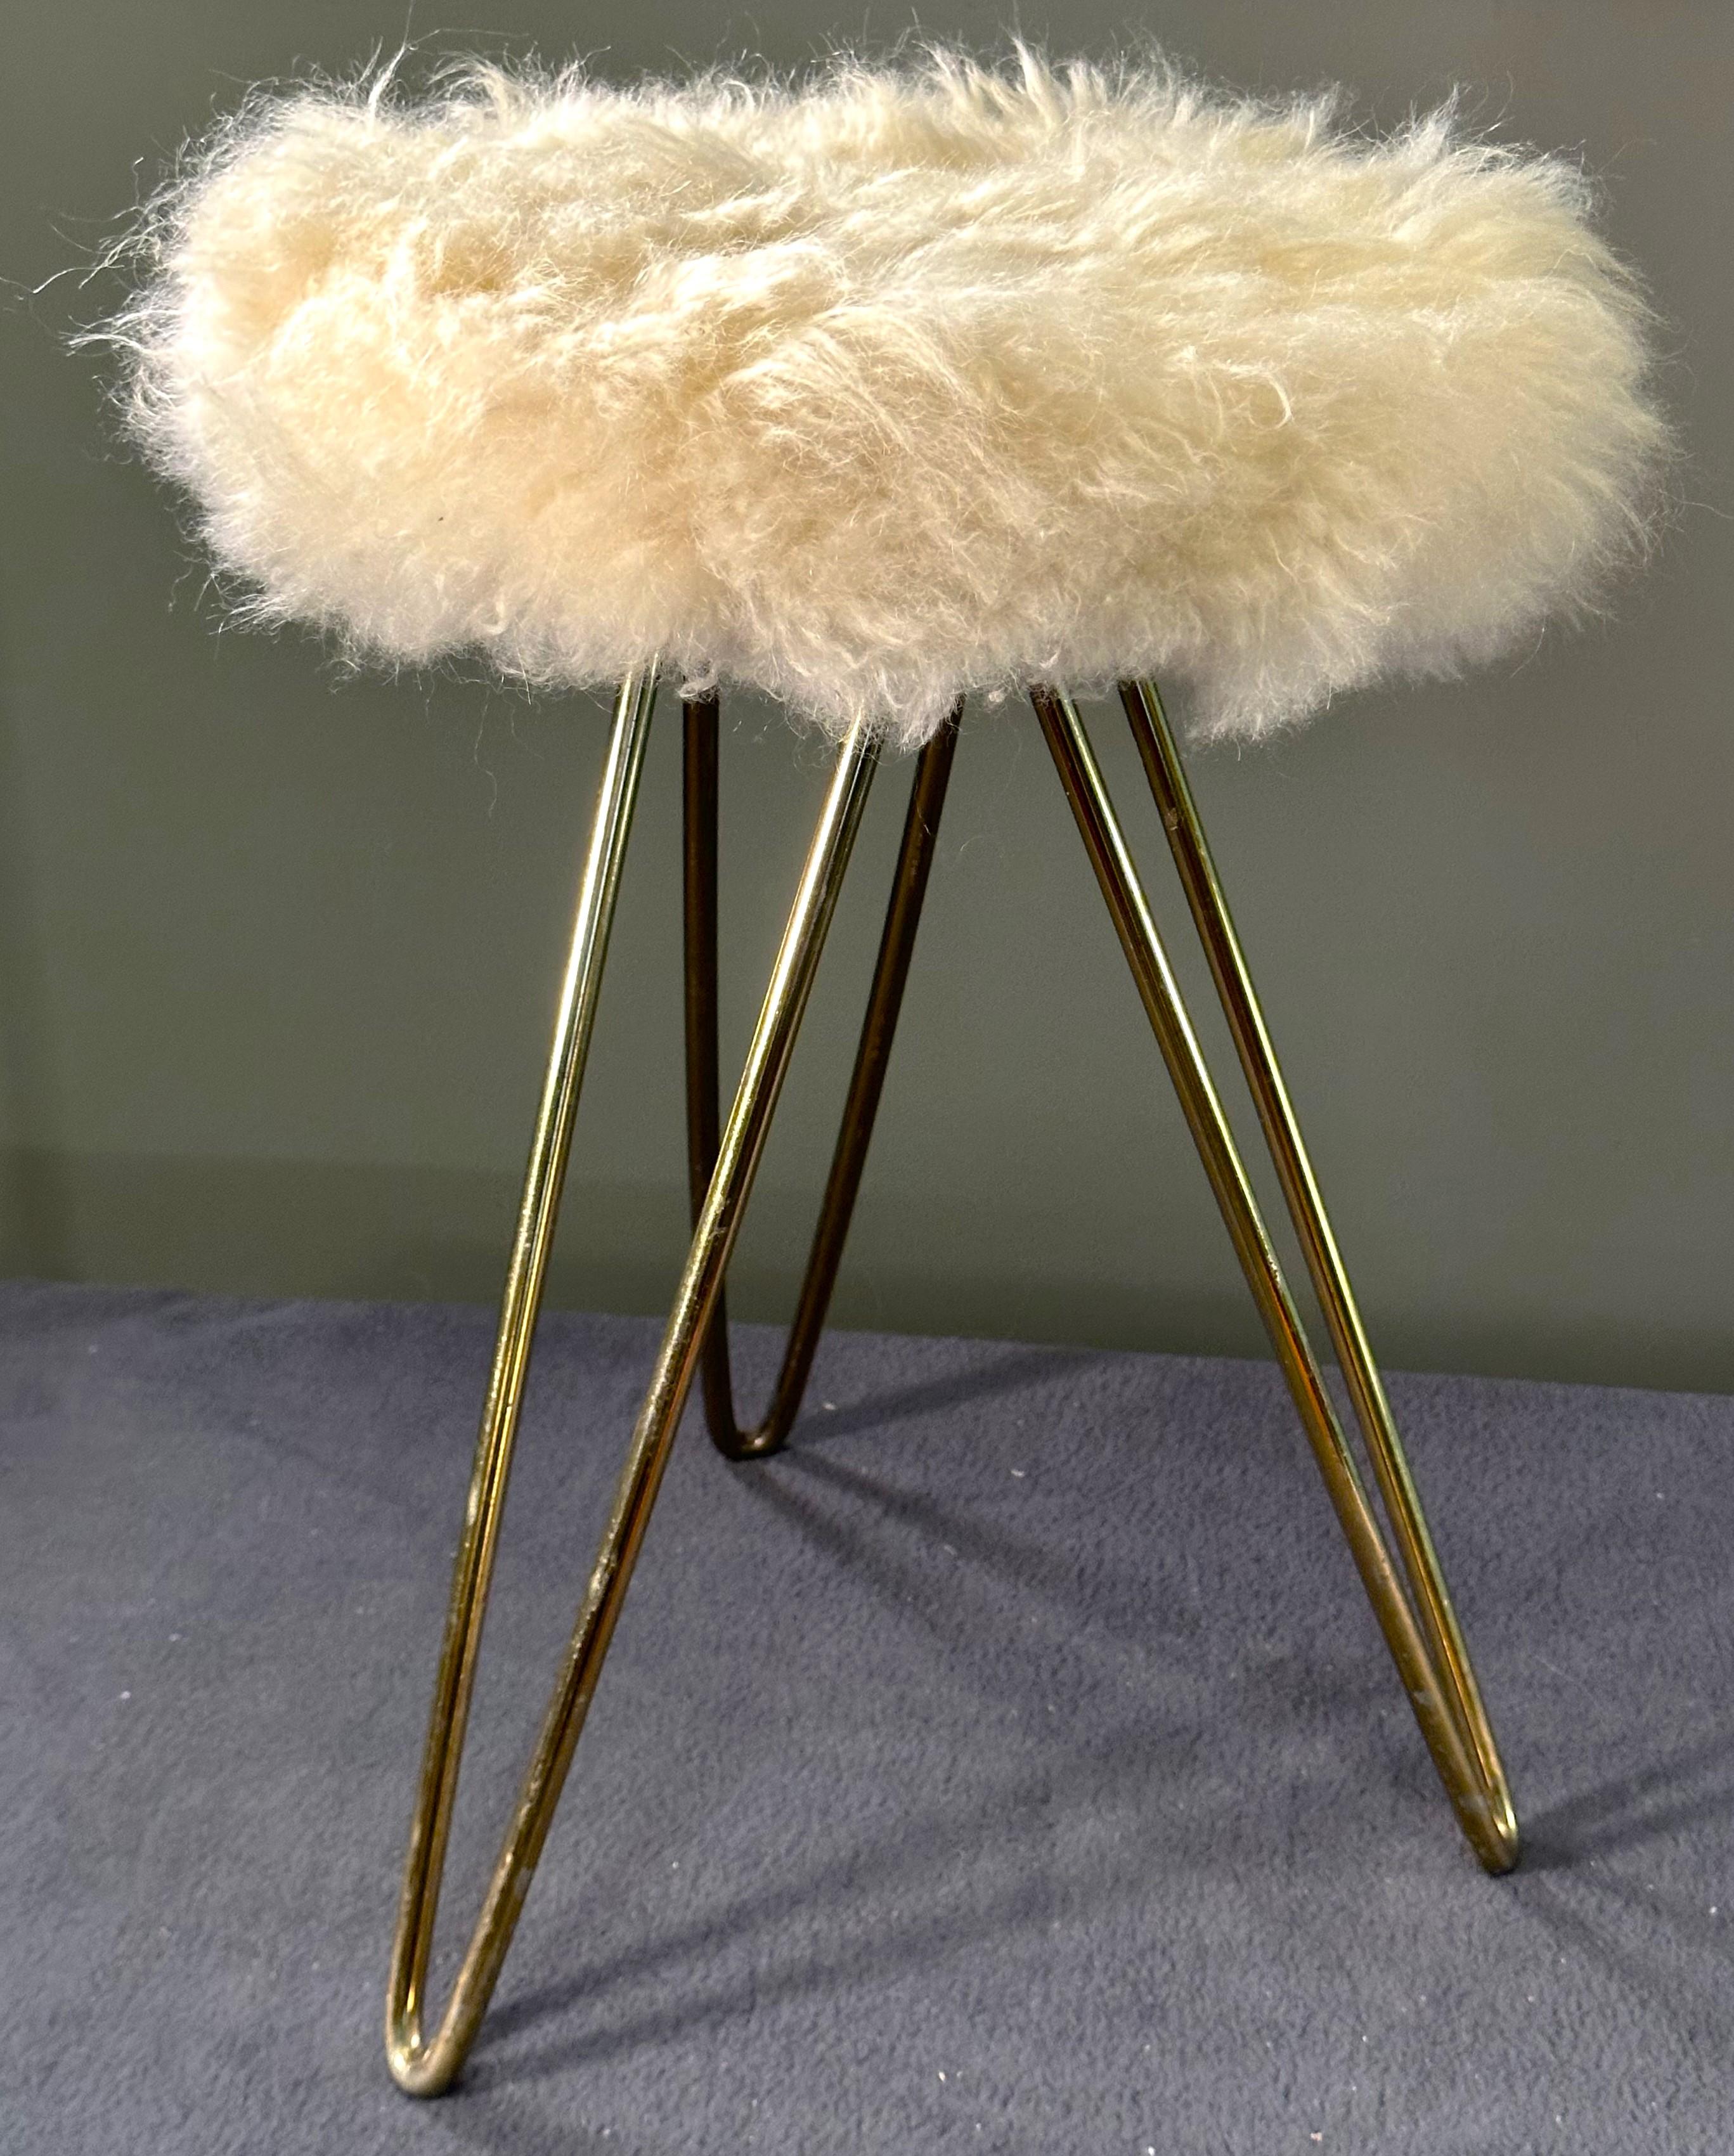 Mid-Century Hairpin Legs Fur Stool, 1950s, France For Sale 10